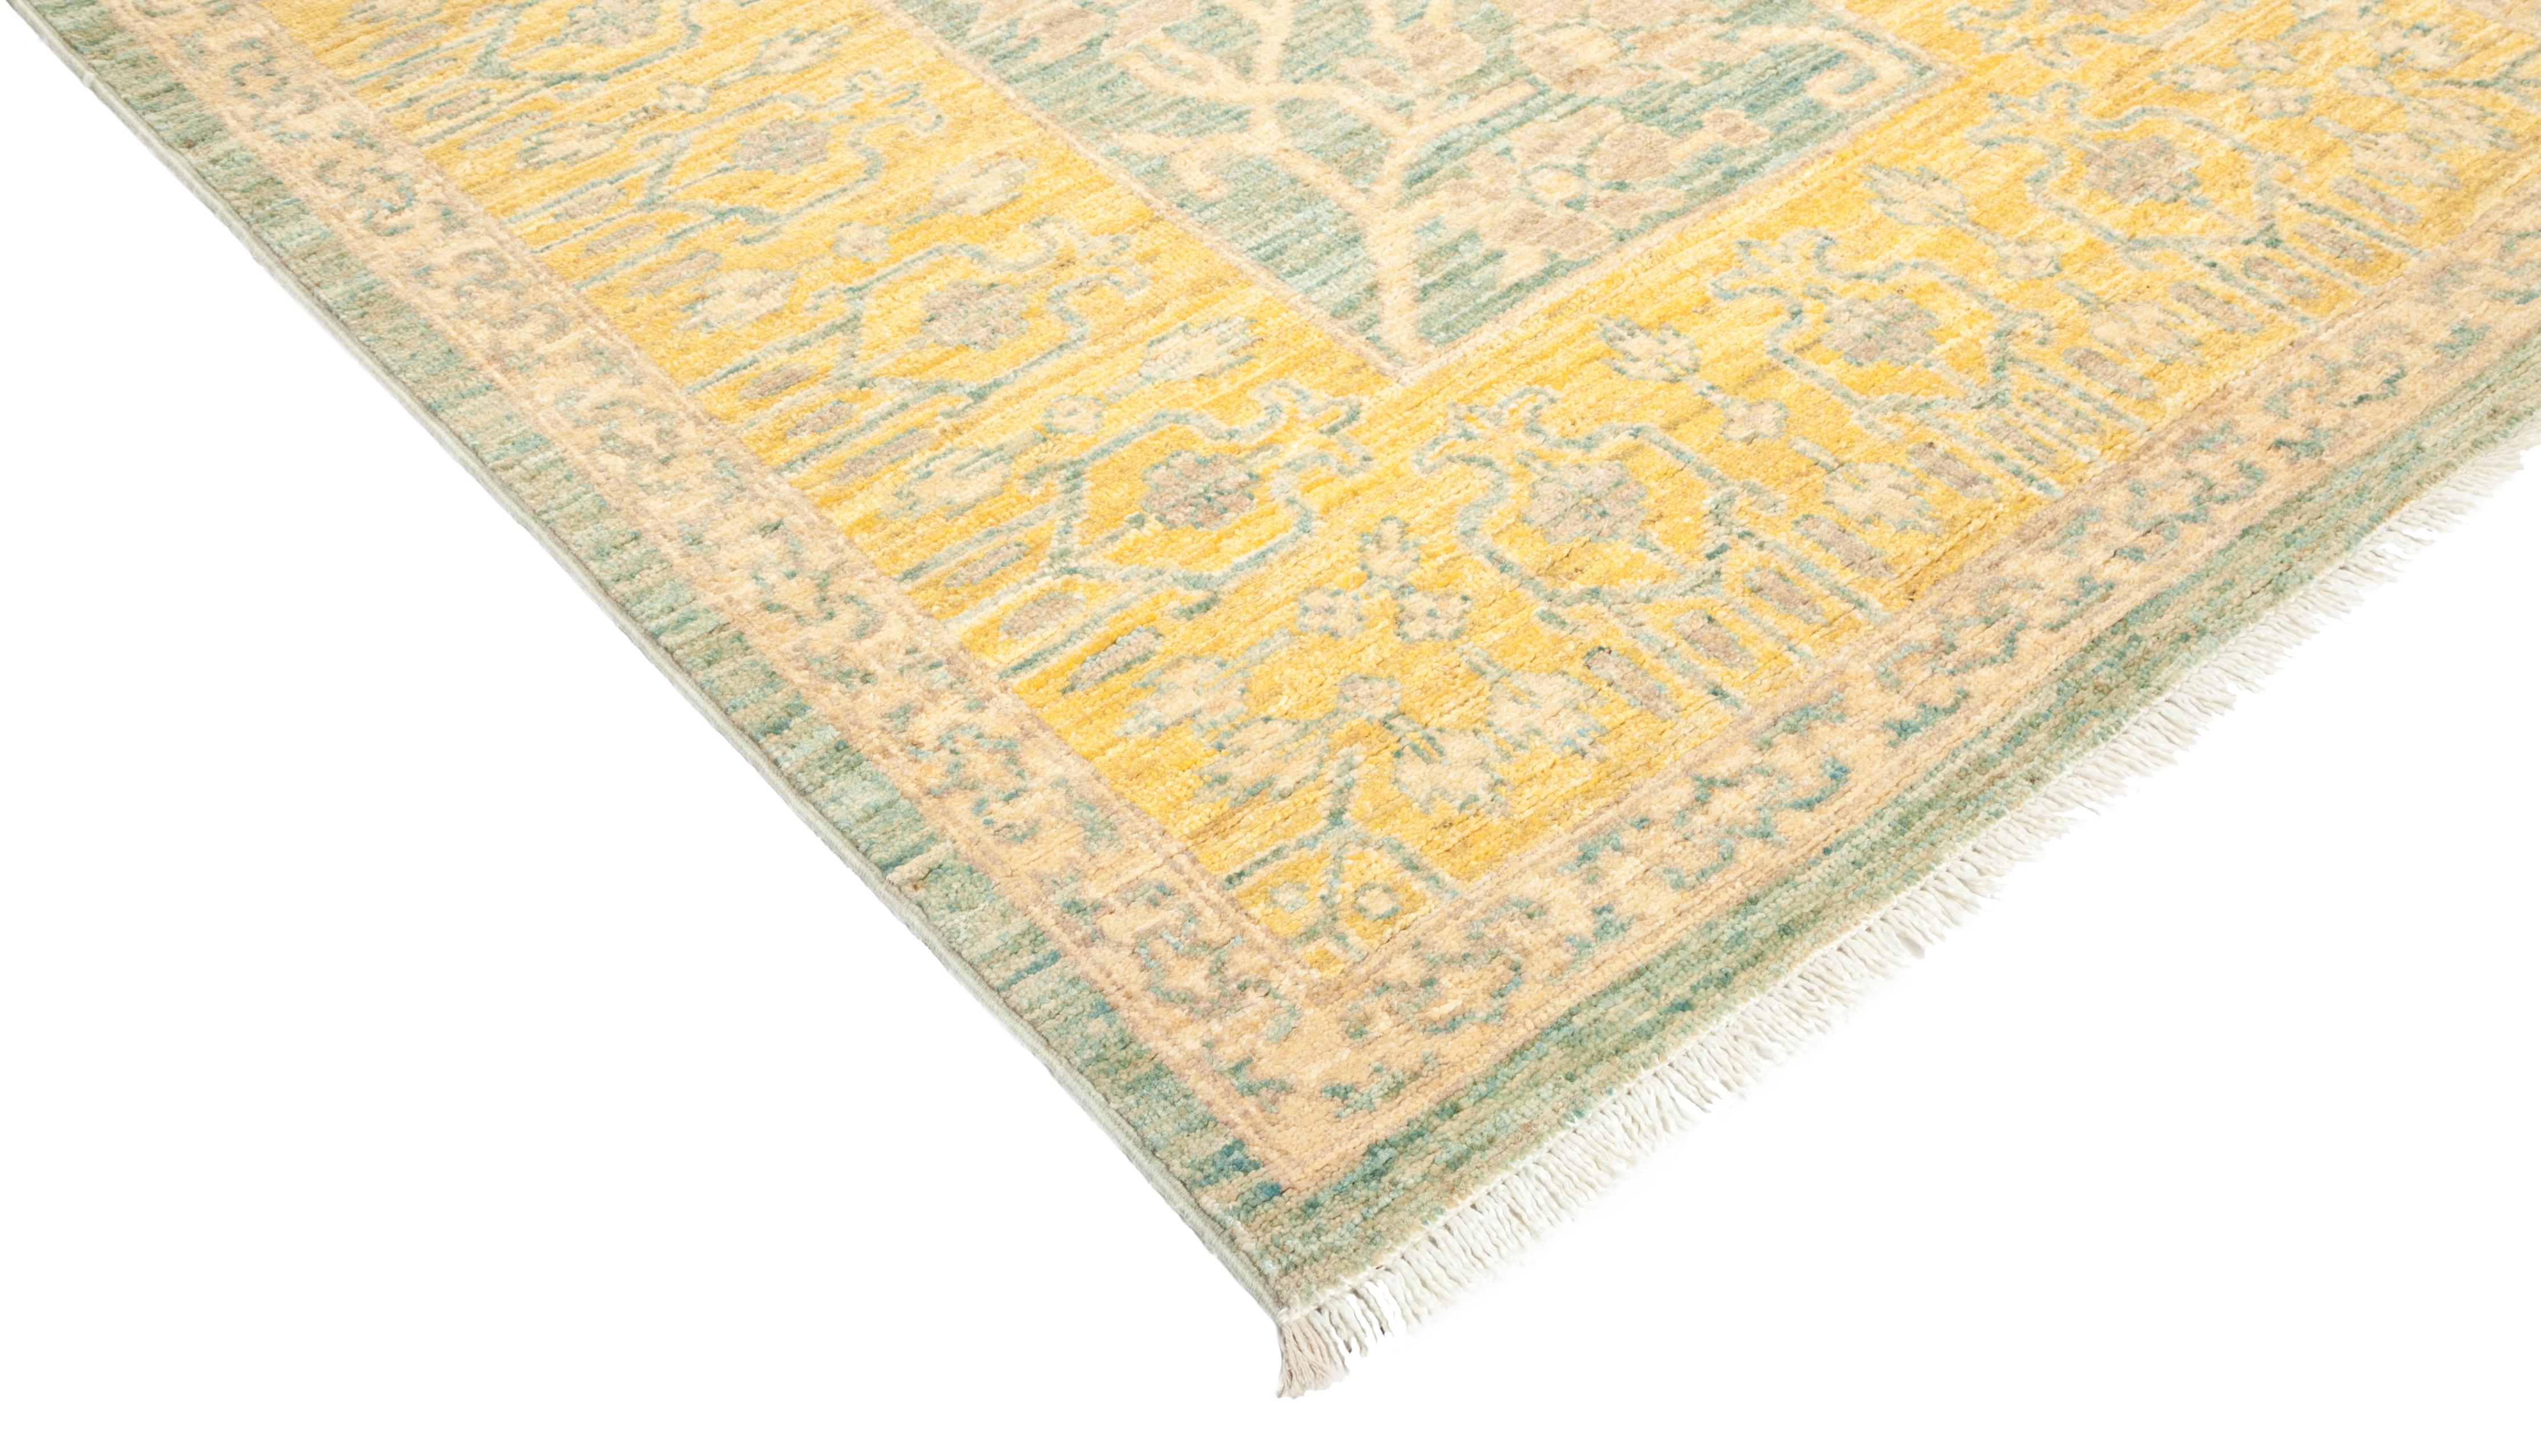 Color: Green - Made in: Pakistan. 100% wool. Whether boasting a field of flowers or ancient tribal symbols, patterned rugs are the easiest way to enrich a space. Subtle colors and intricate motifs reinforce the quiet sophistication of a traditional